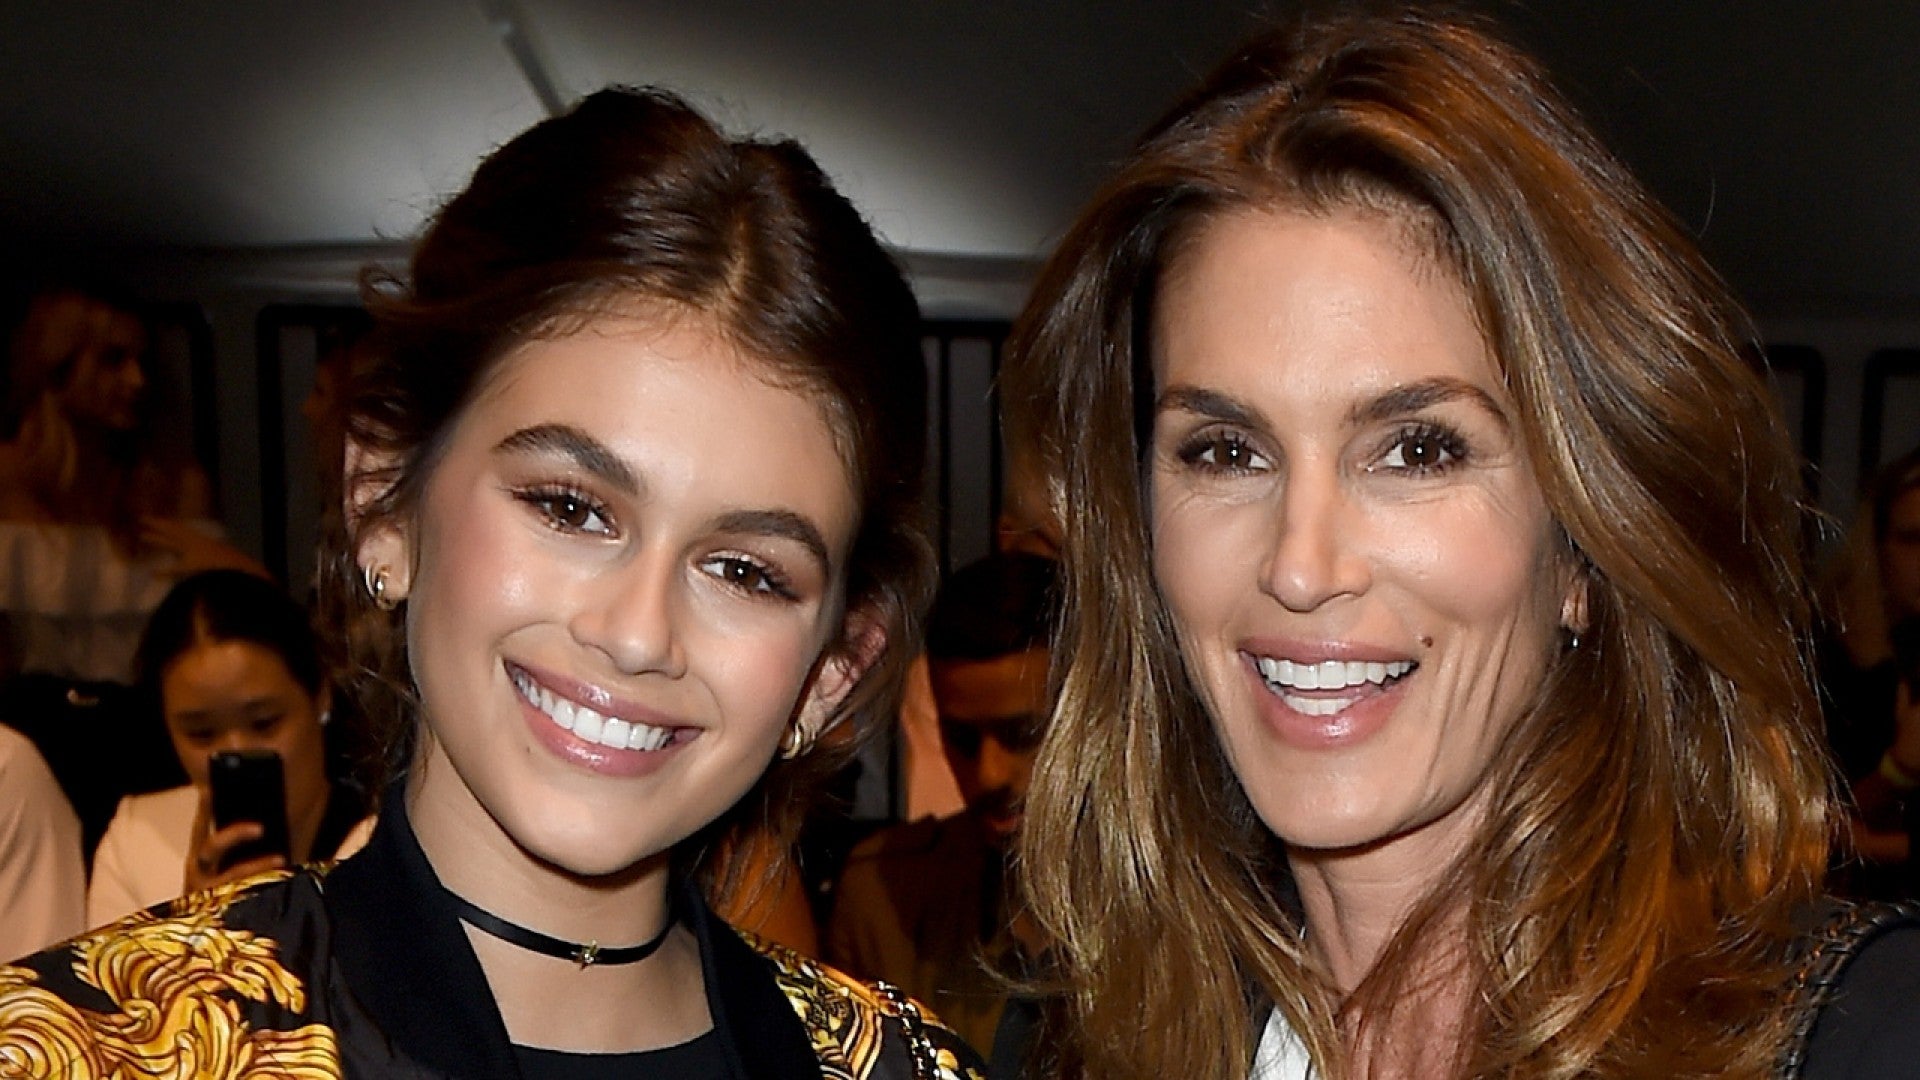 Kaia Gerber Nails Her Mom Cindy Crawford's Iconic Photo Shoot